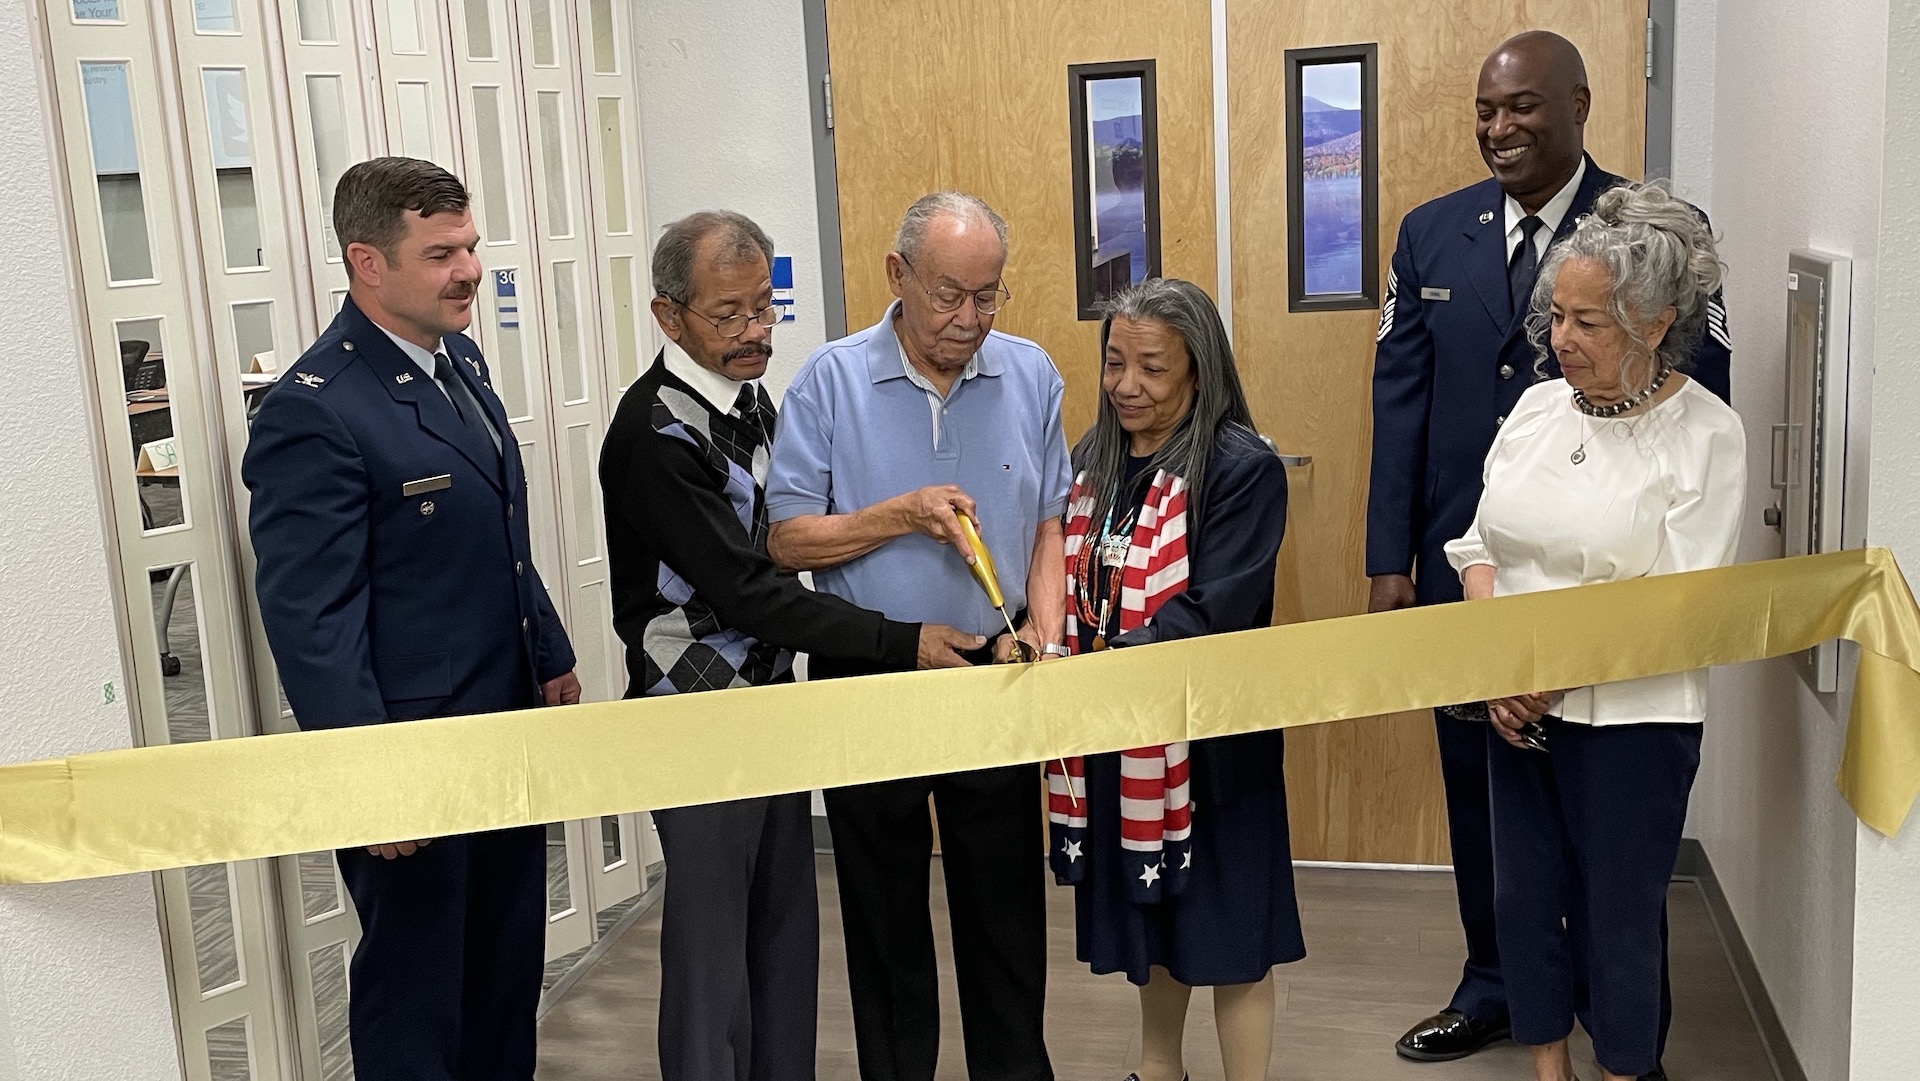 The family of Tuskegee Airman George W. Biggs cut the ribbon as the Davis Monthan Resilience Center is named after Major Biggs - April 2022